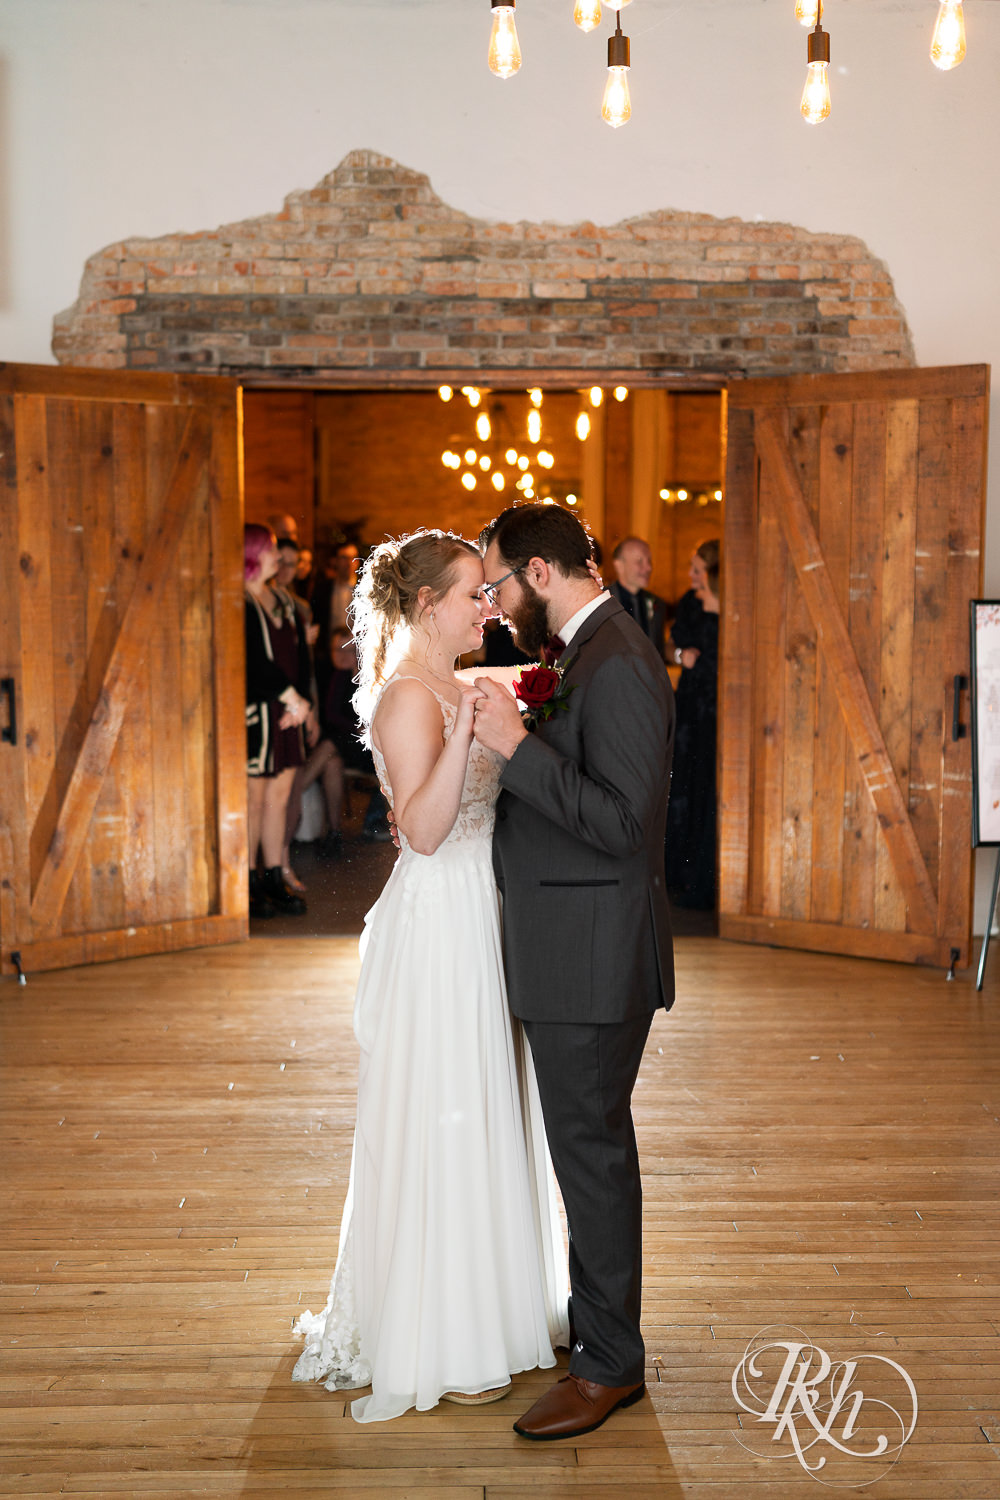 First dance at the Jerome Event Center in Delano, Minnesota.